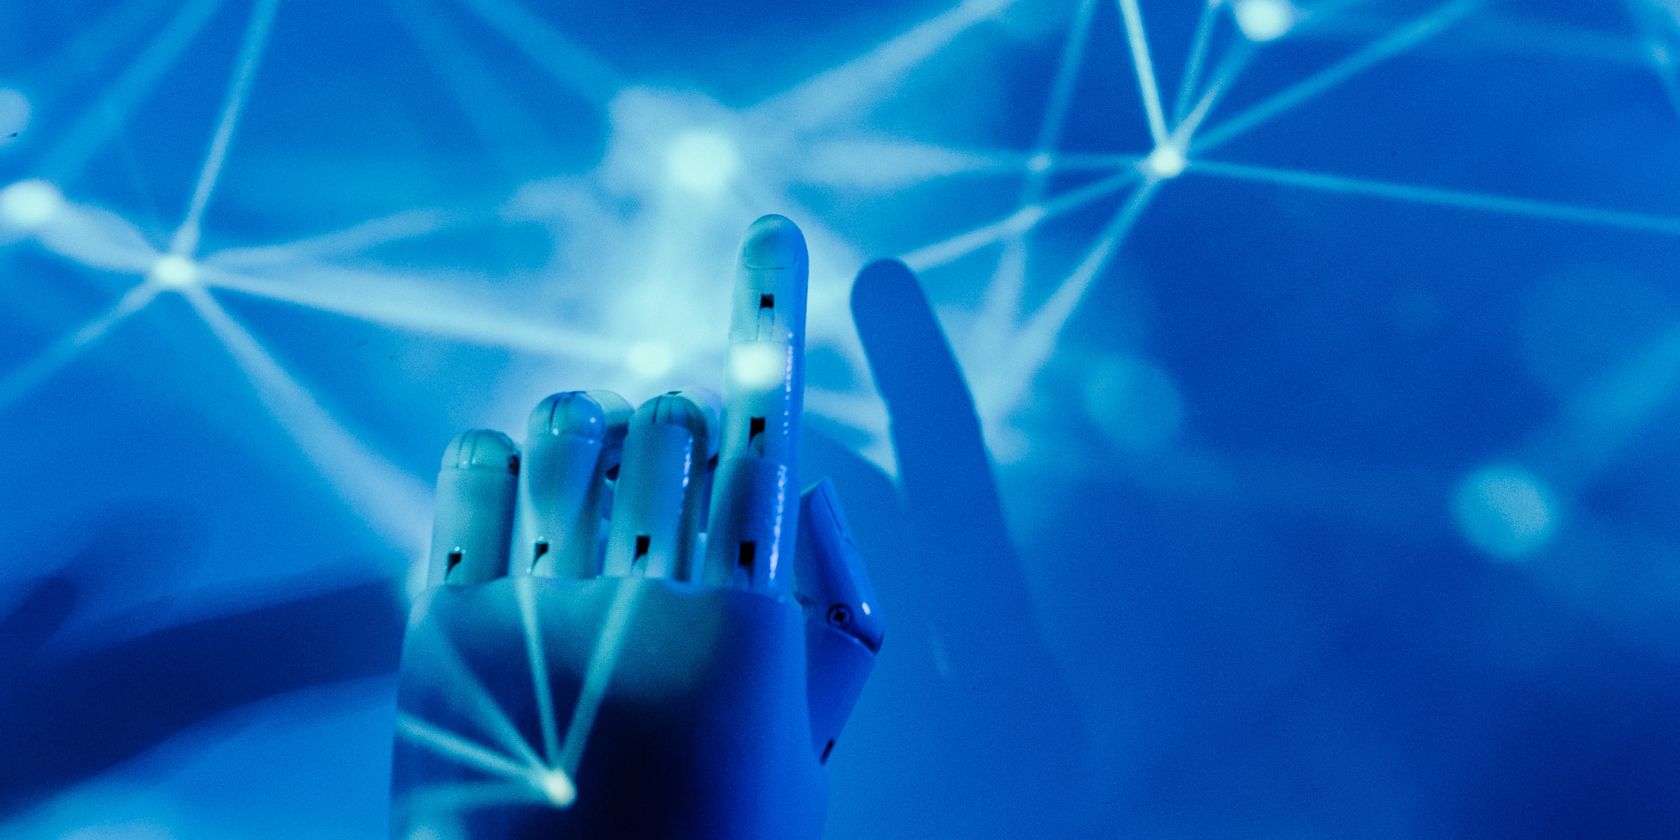 Robotic hand pointing at blue lights